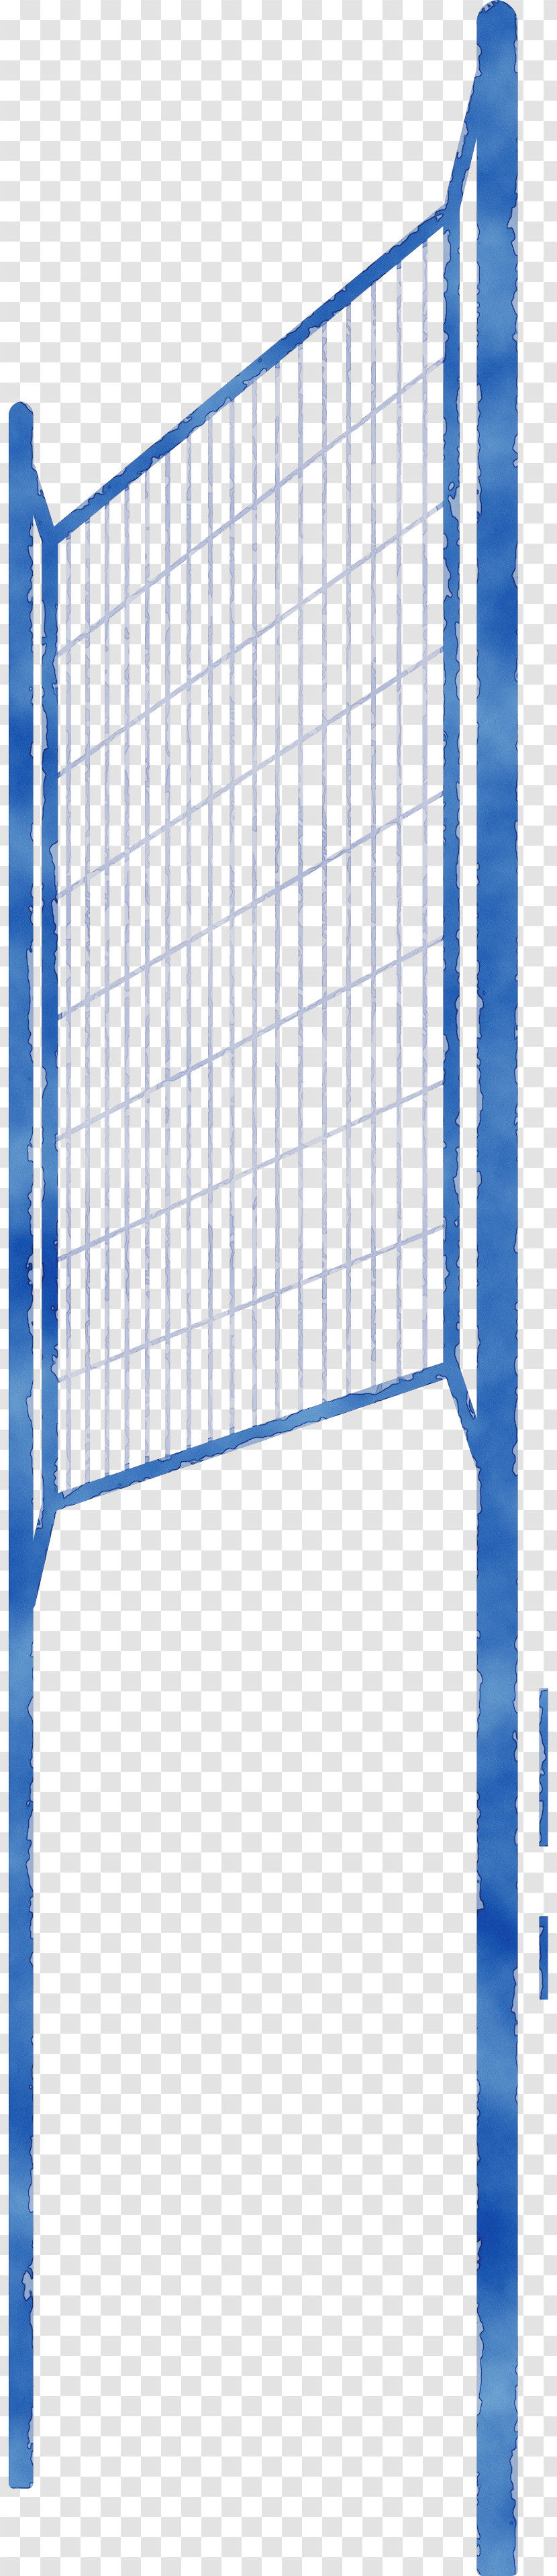 Fence Window Facade Angle Line Transparent PNG